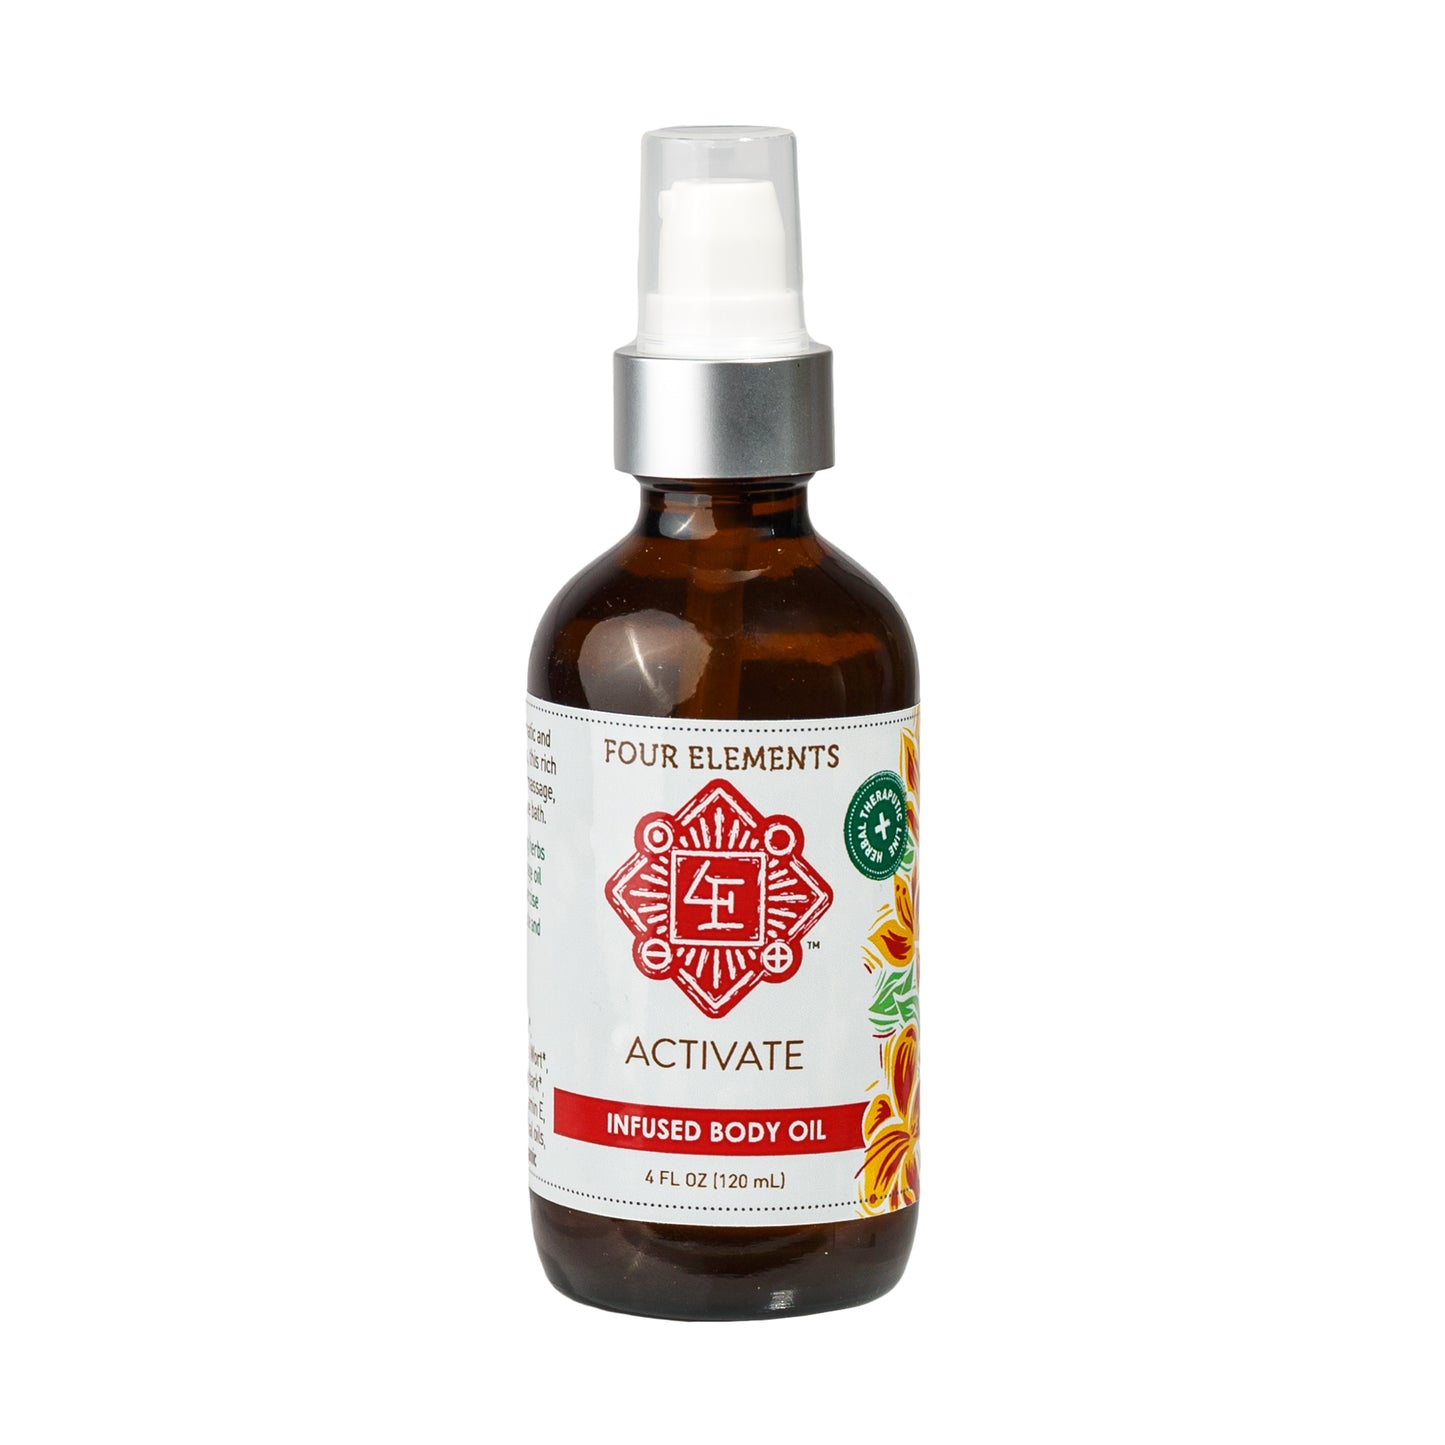 Primary Image of Activate Body Oil 